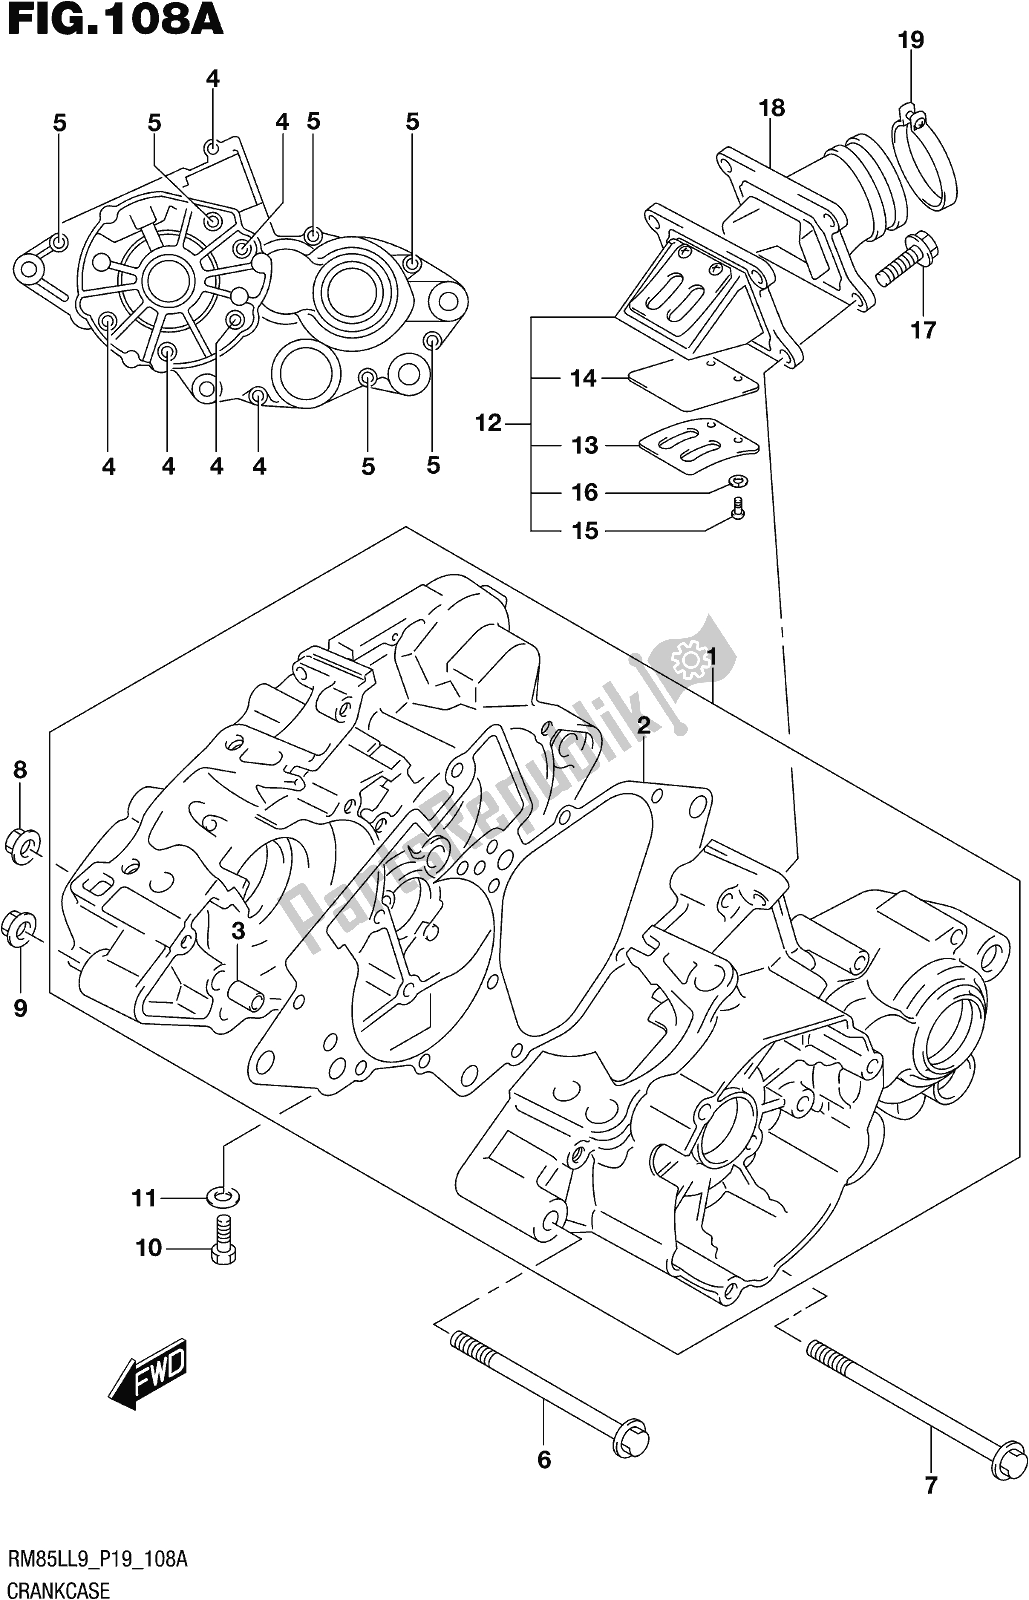 All parts for the Fig. 108a Crankcase of the Suzuki RM 85L 2019